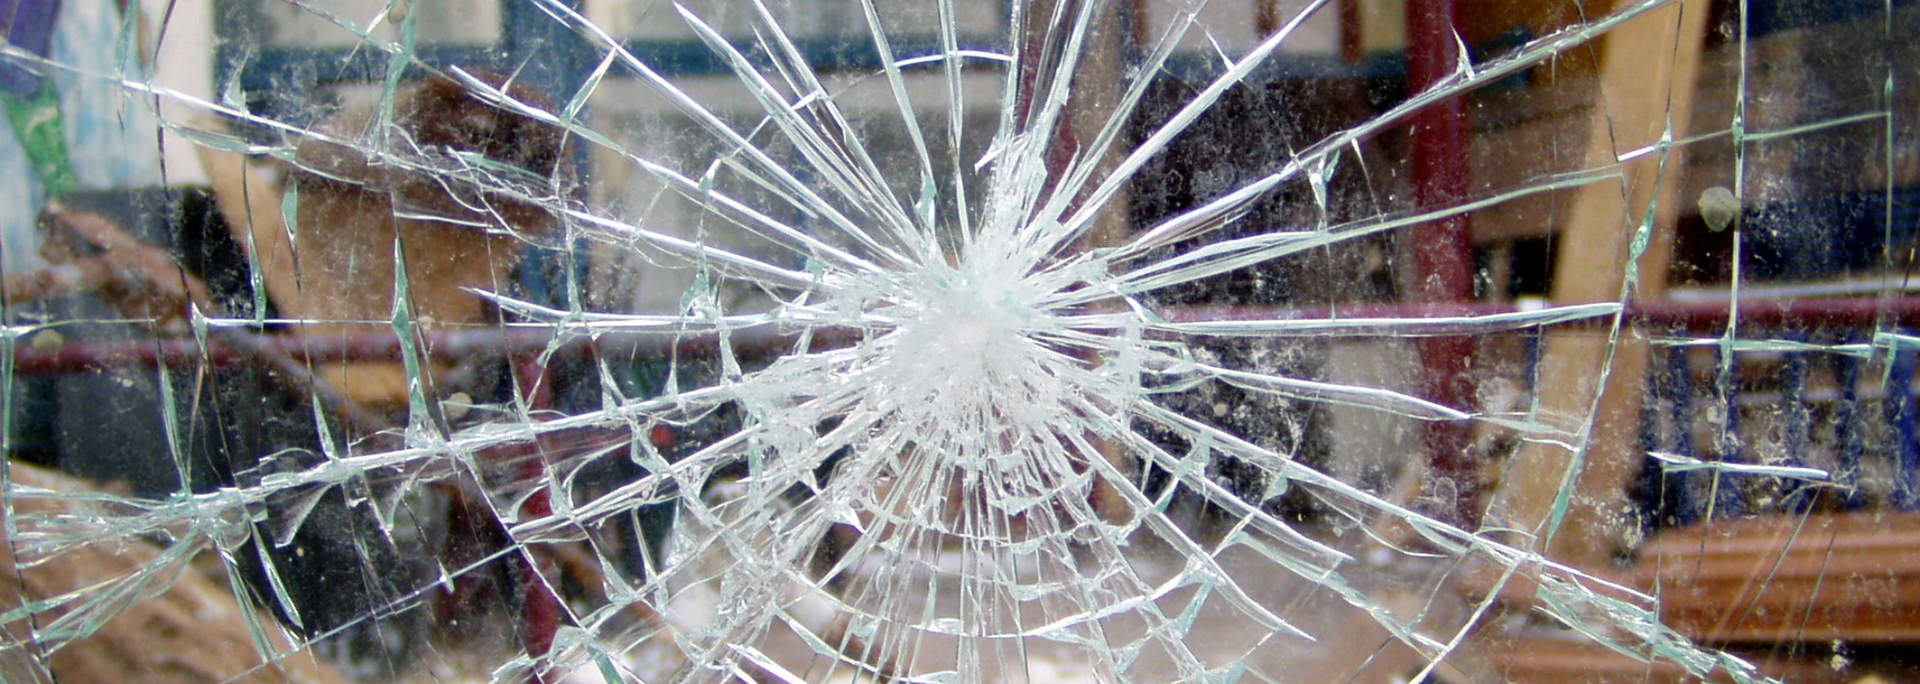 Picture of smashed glass showing the spiderweb pattern